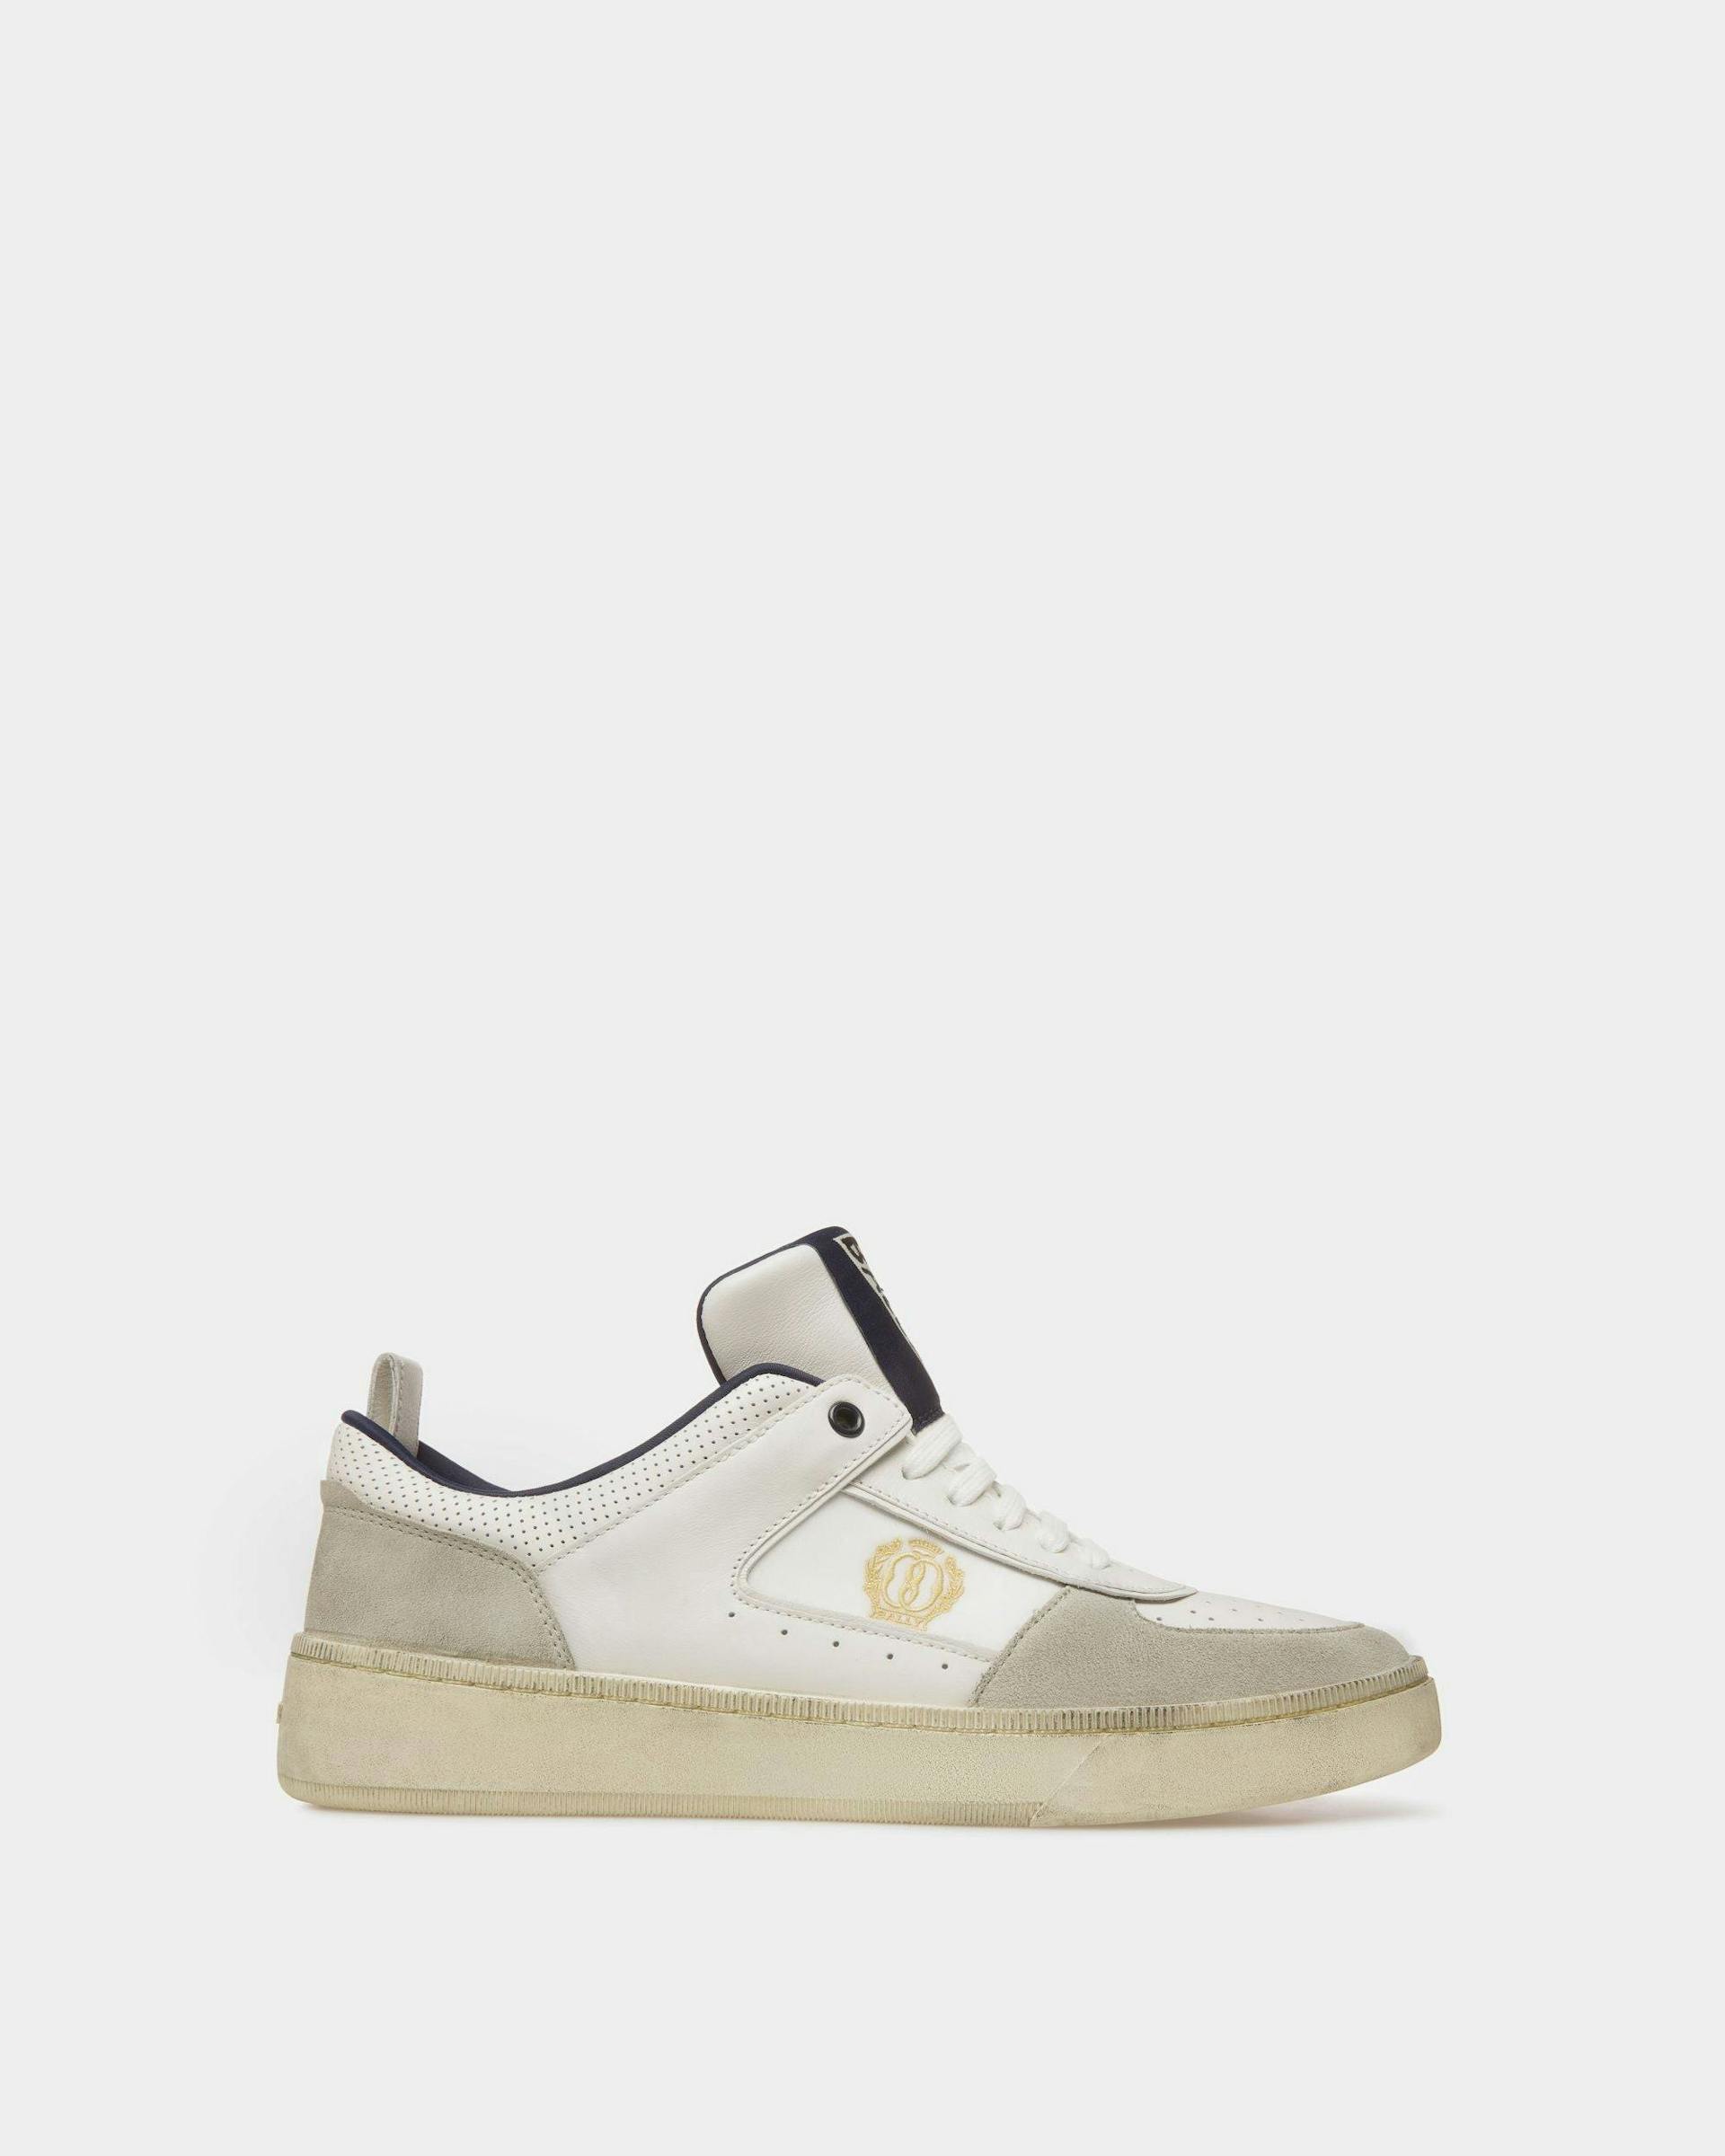 Men's Raise Sneakers In Dusty White And Midnight Leather And Fabric | Bally | Still Life Side